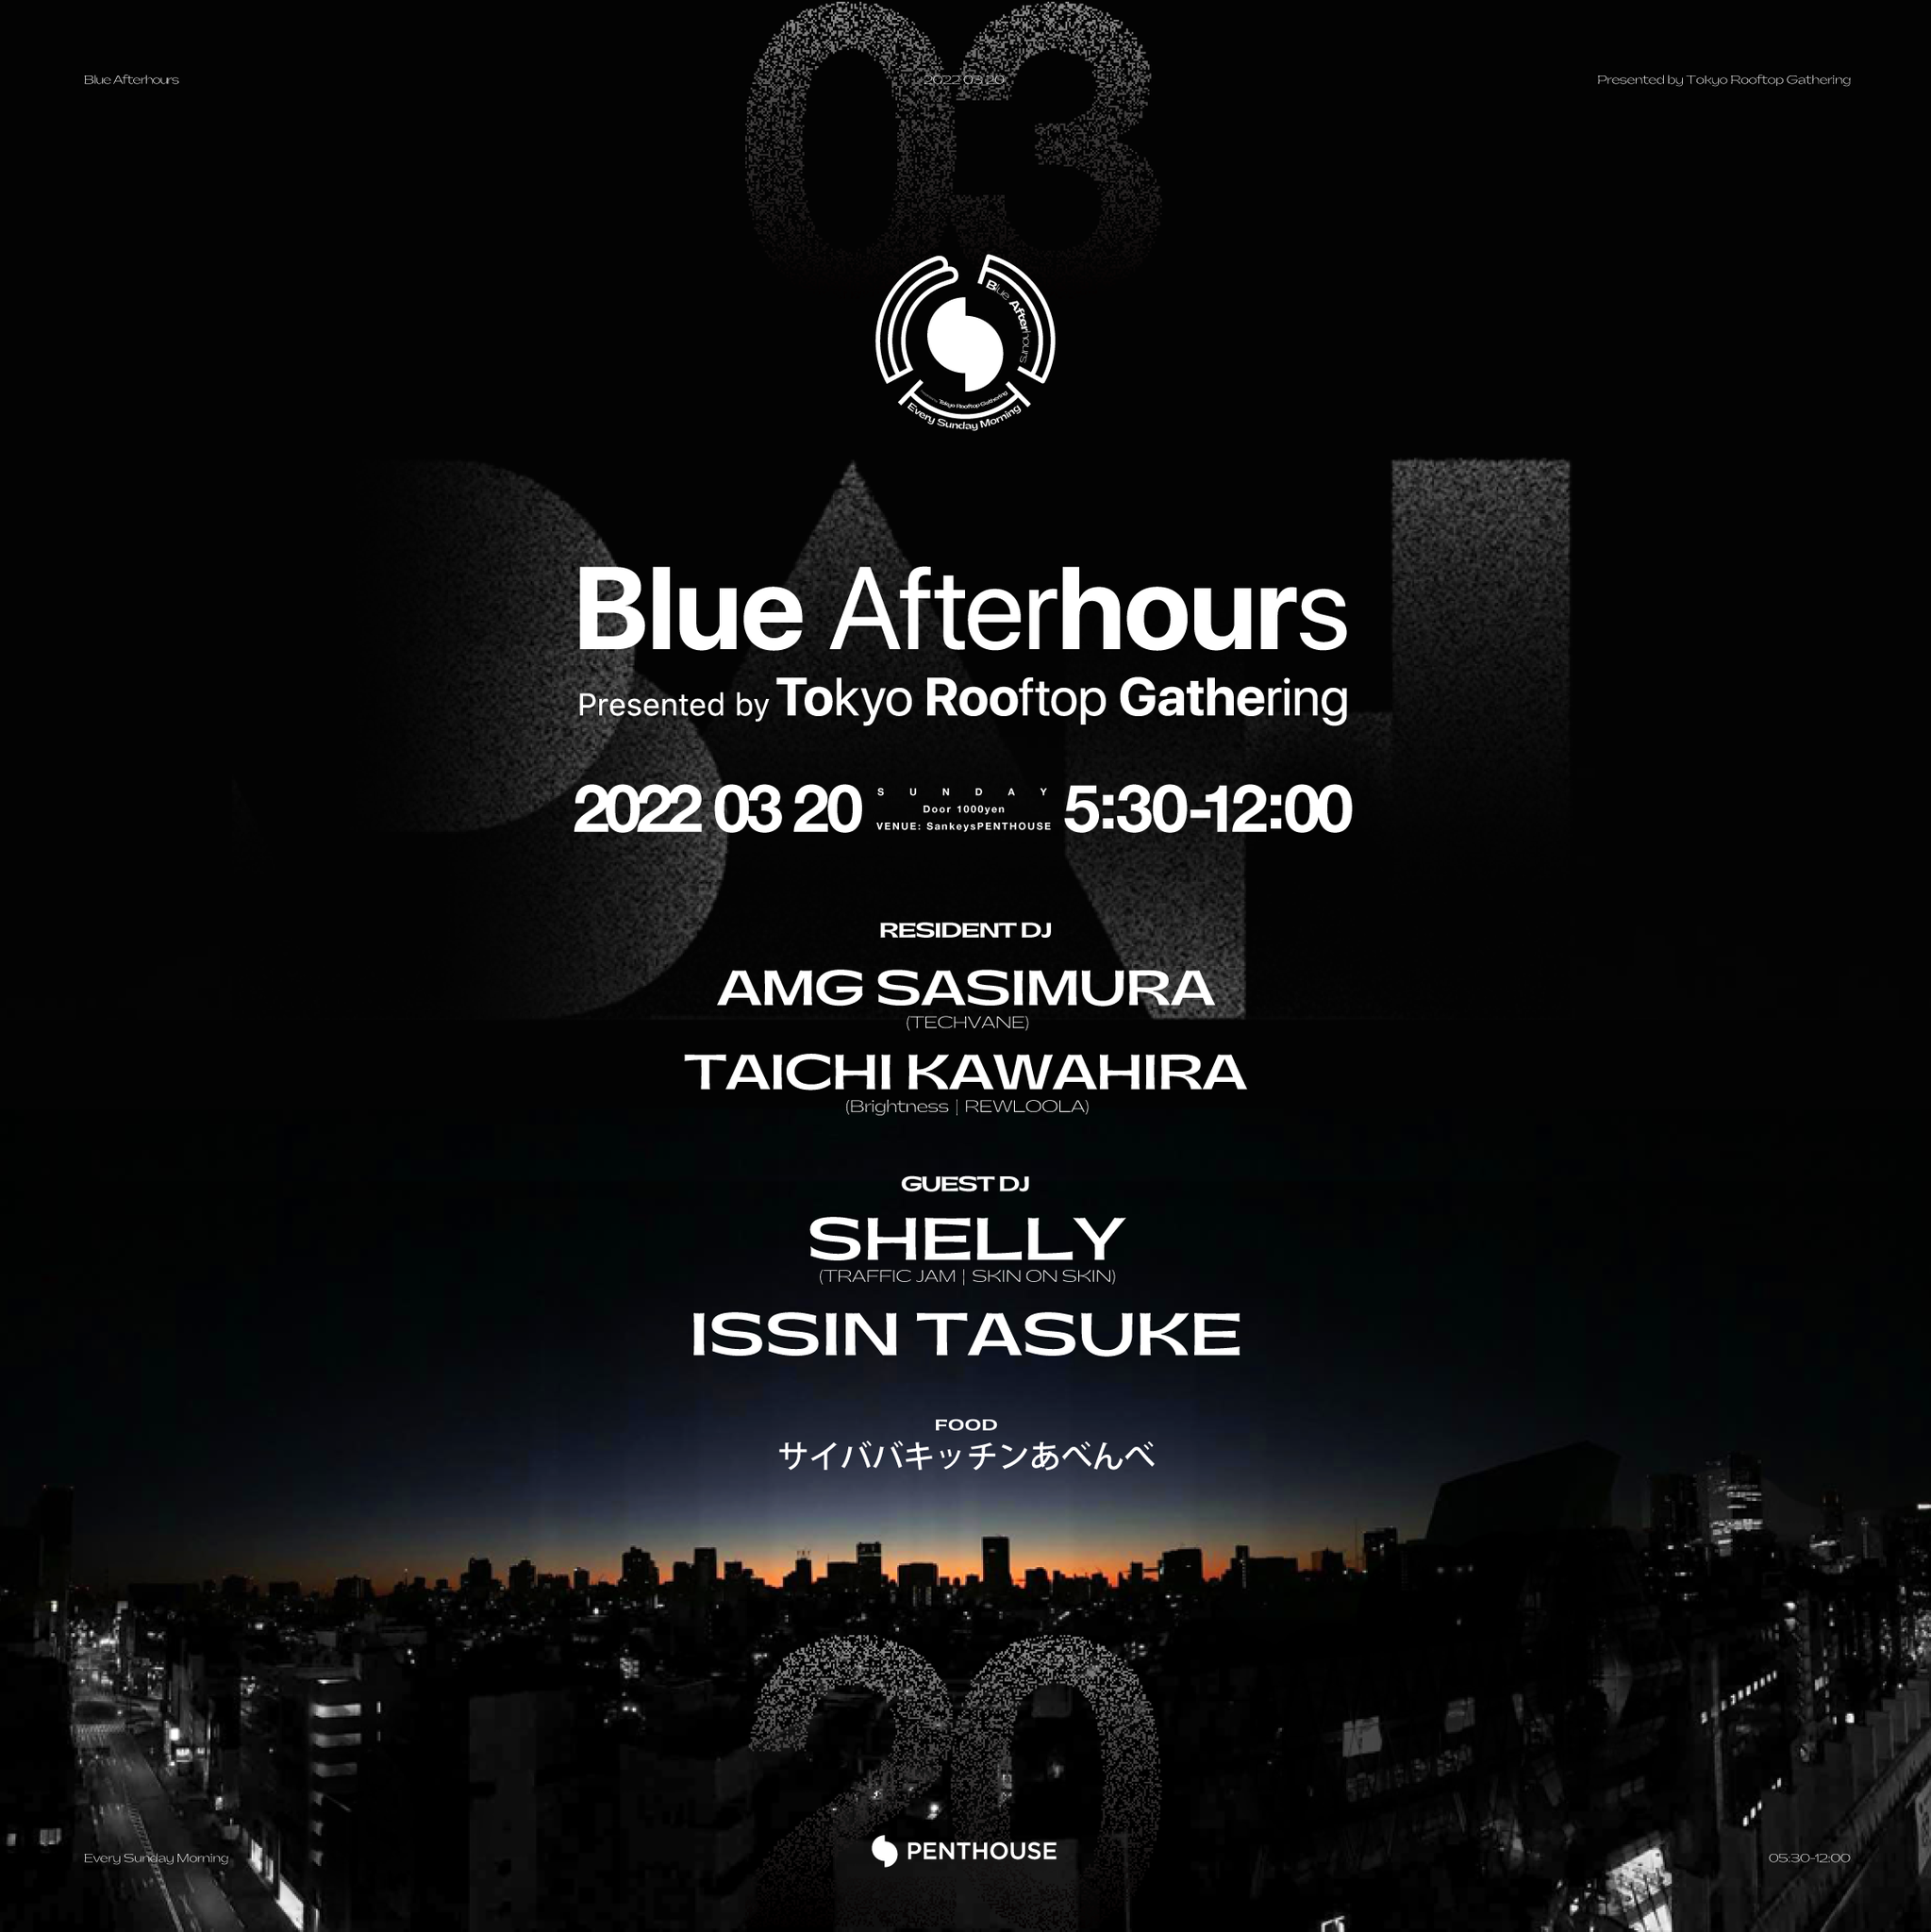 Blue Afterhours by Tokyo Rooftop Gathering